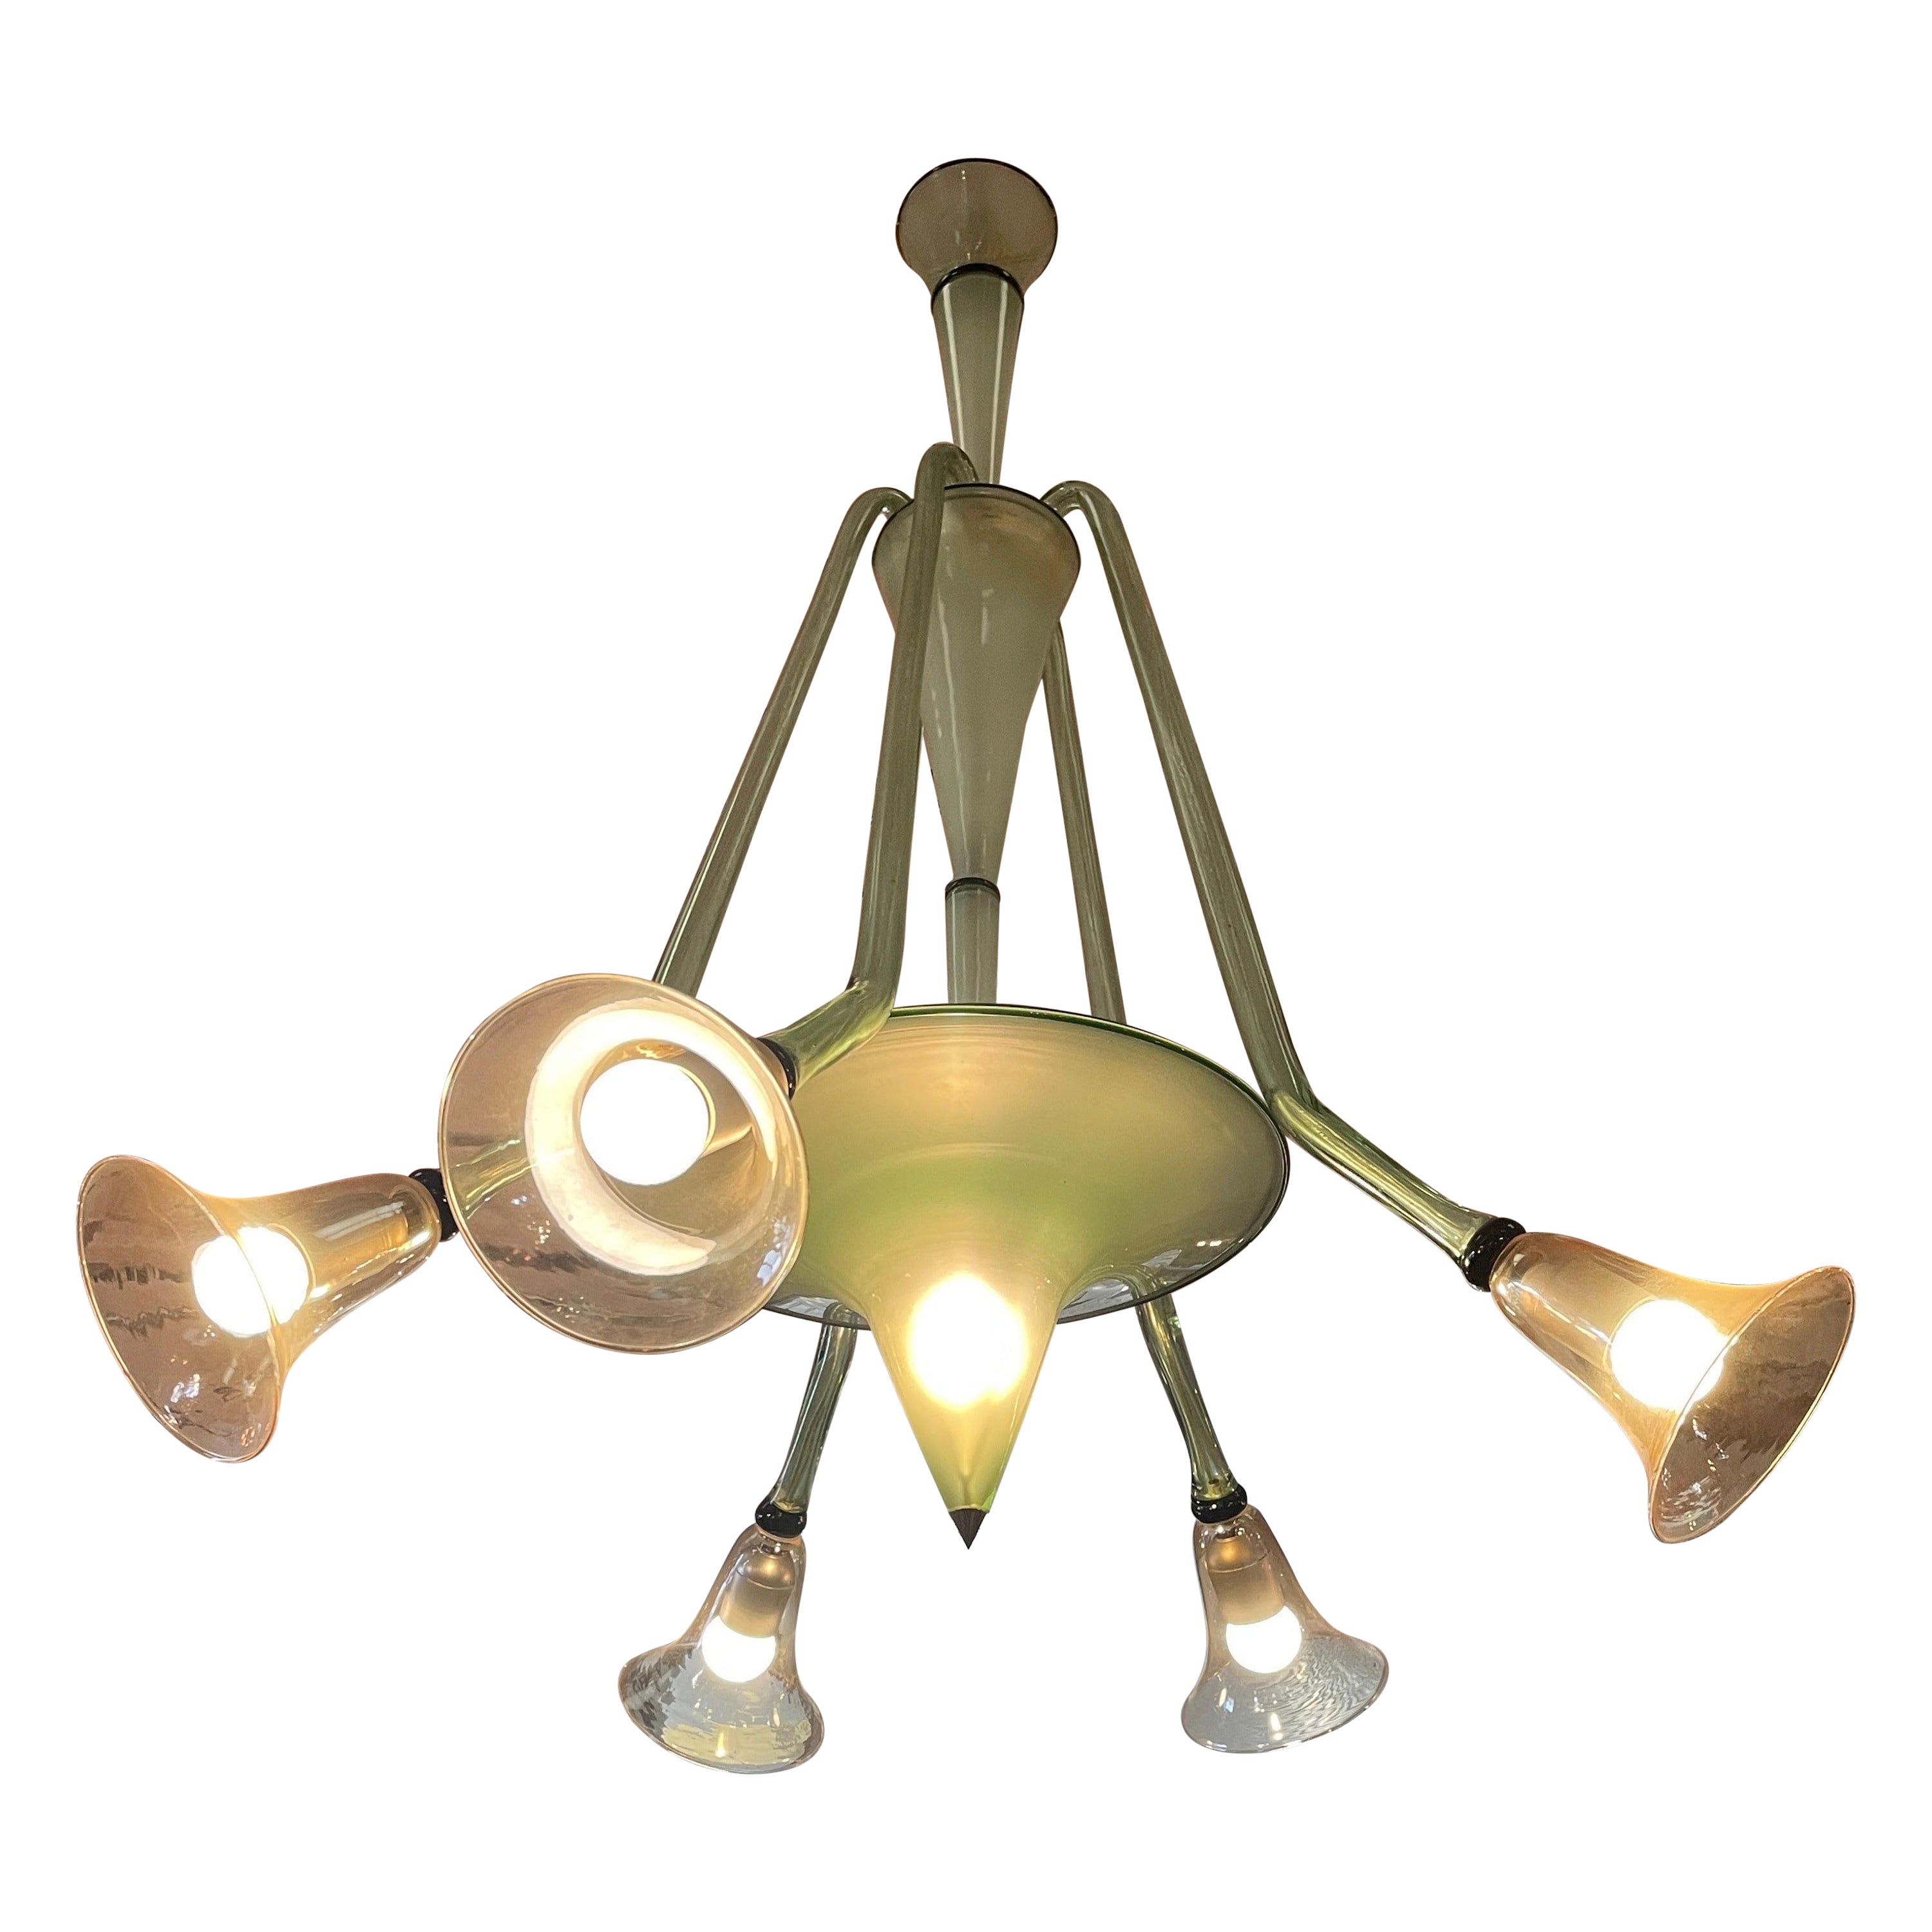 Murano Glass Fratelli Toso Pendant Chandelier With 5 Arms For Sale